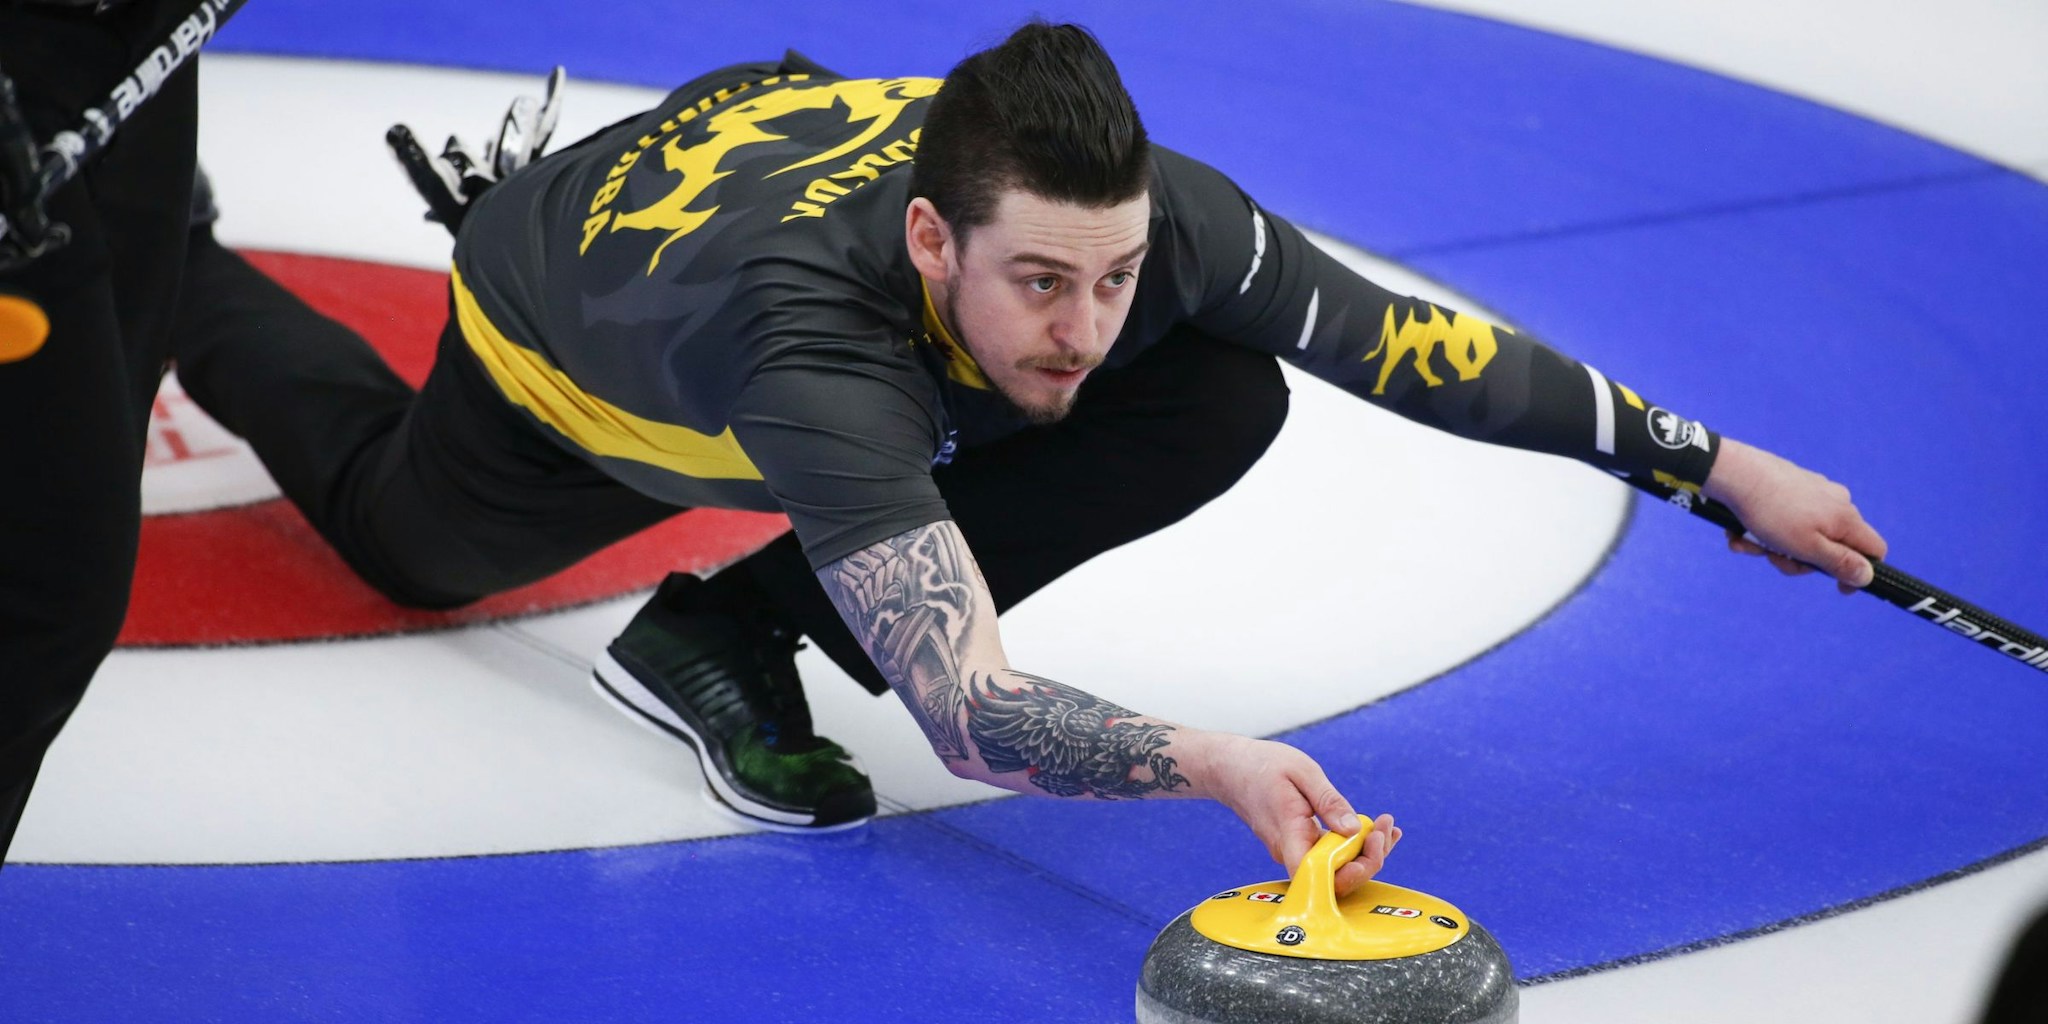 Colin Hodgson releasing a curling rock during a match